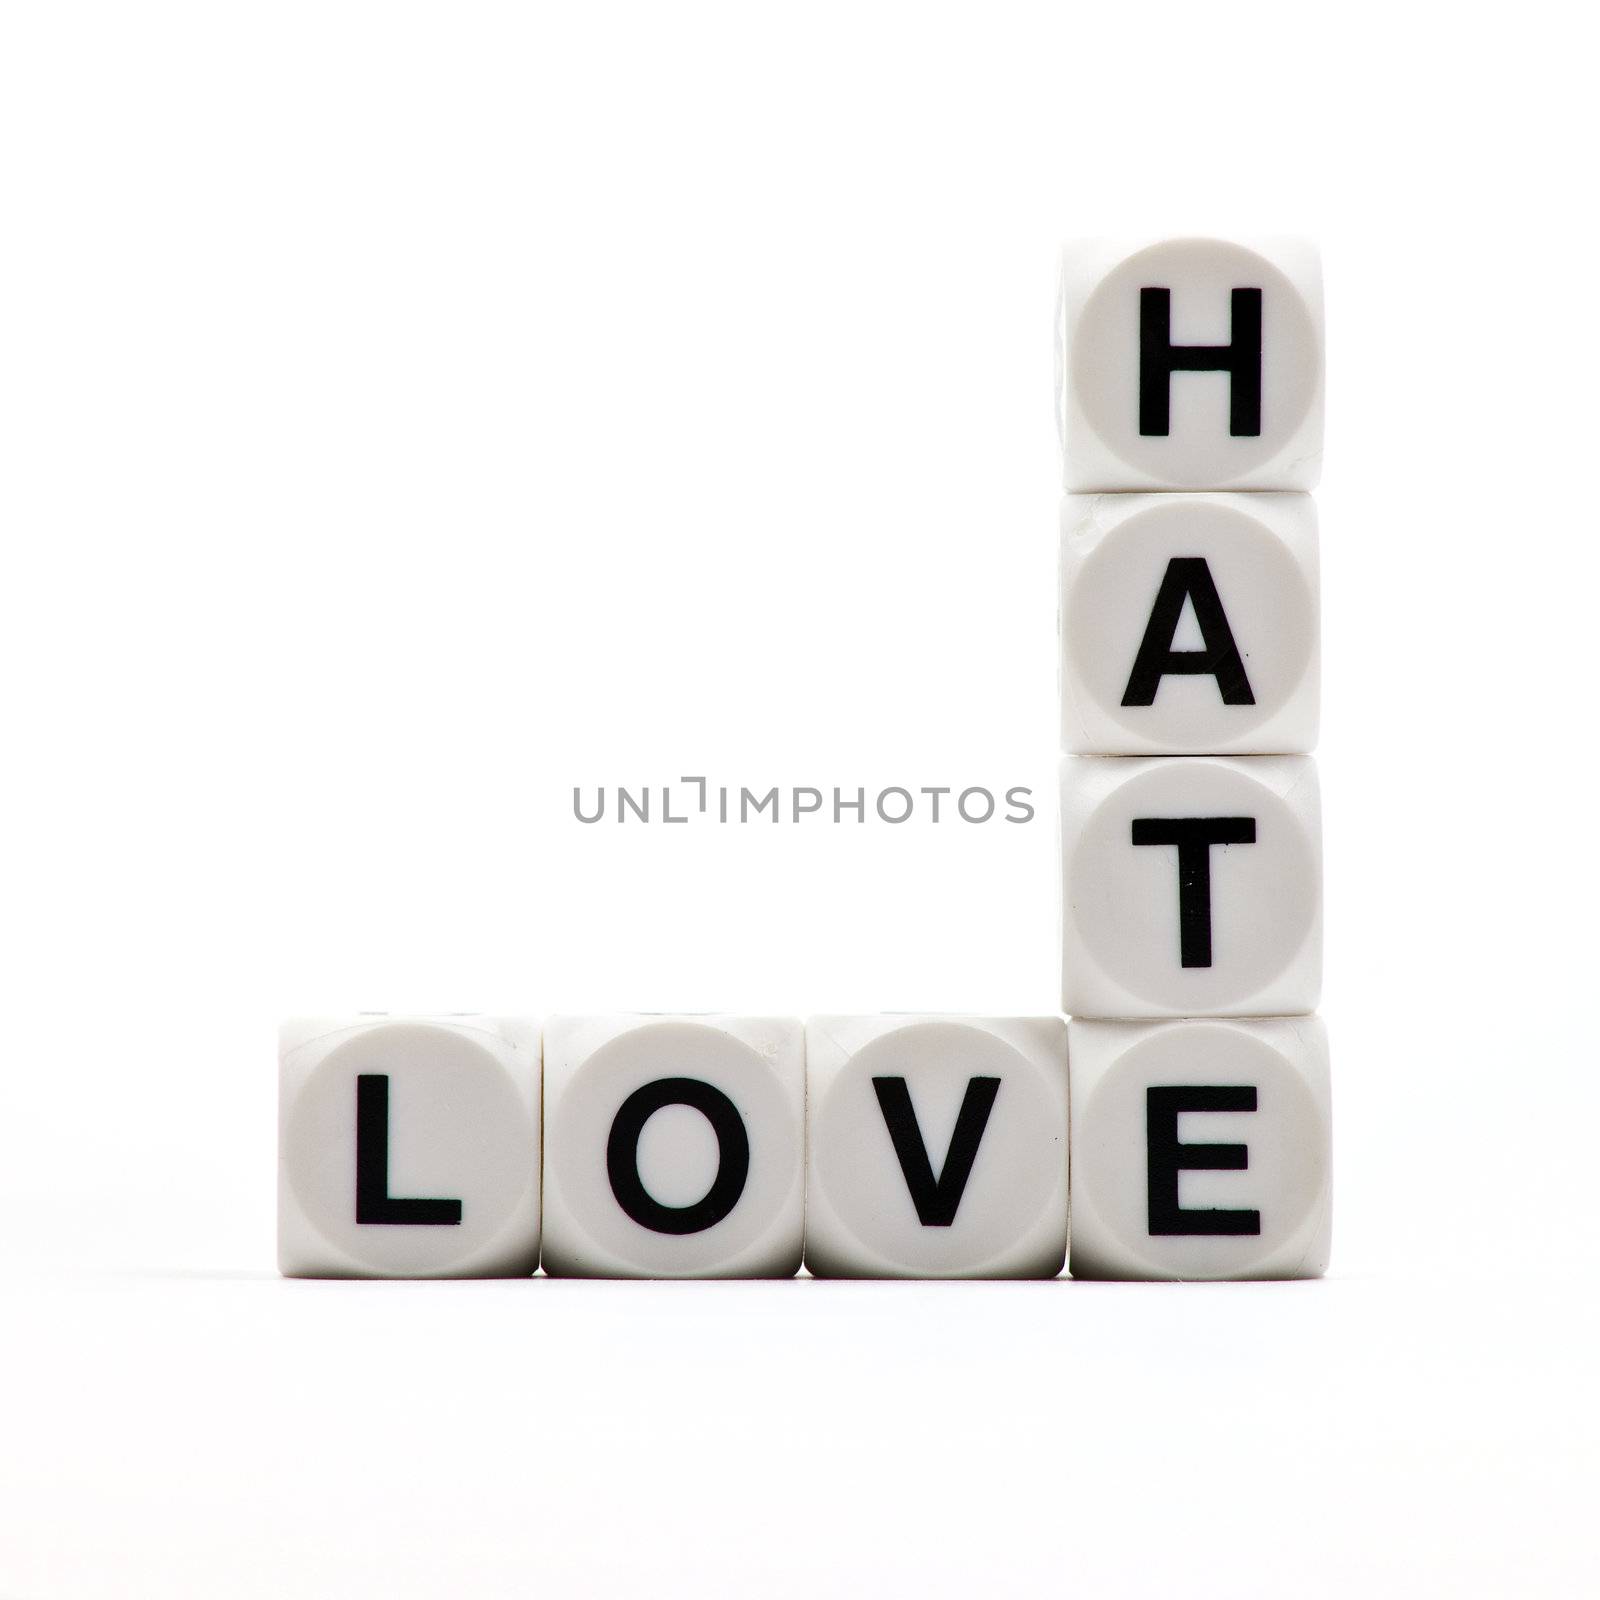 Love and Hate.